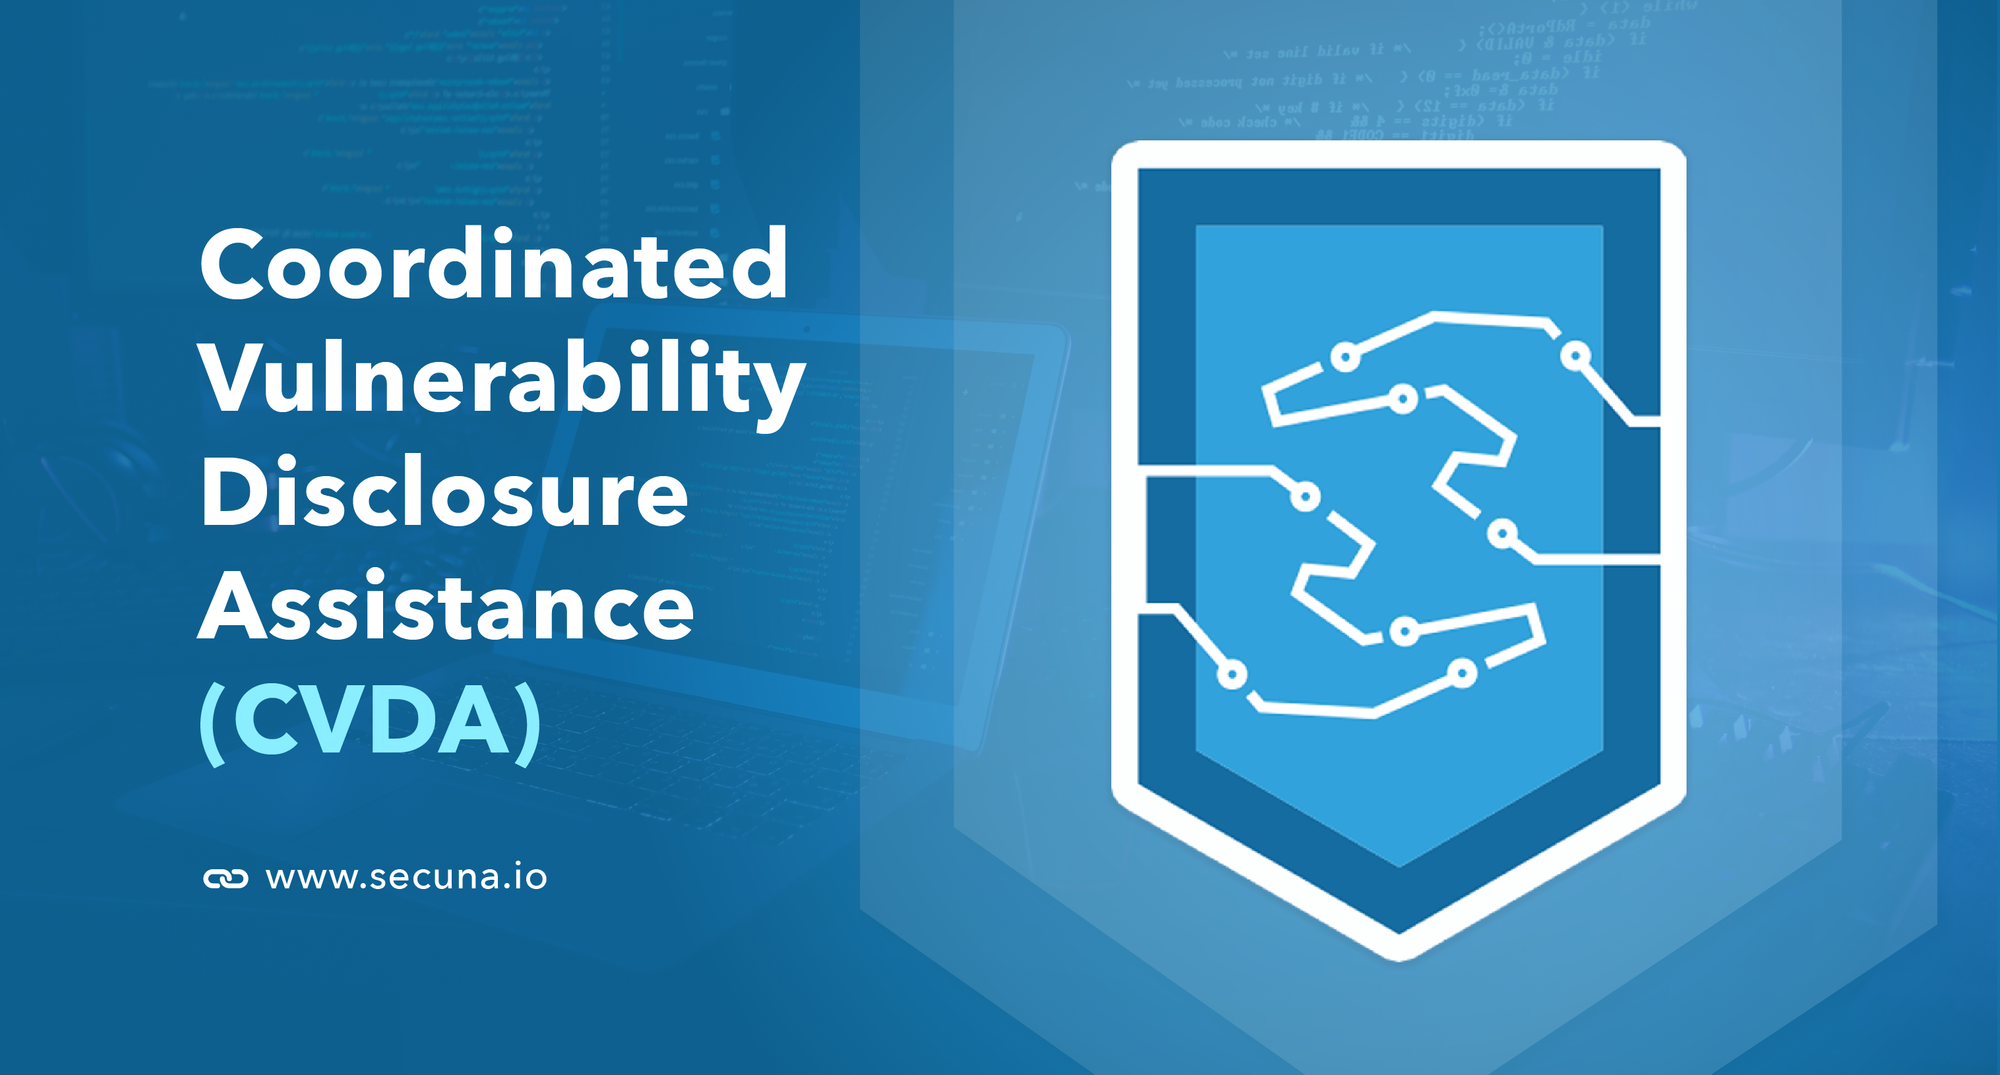 Coordinated Vulnerability Disclosure Assistance - 911 for Security Researchers